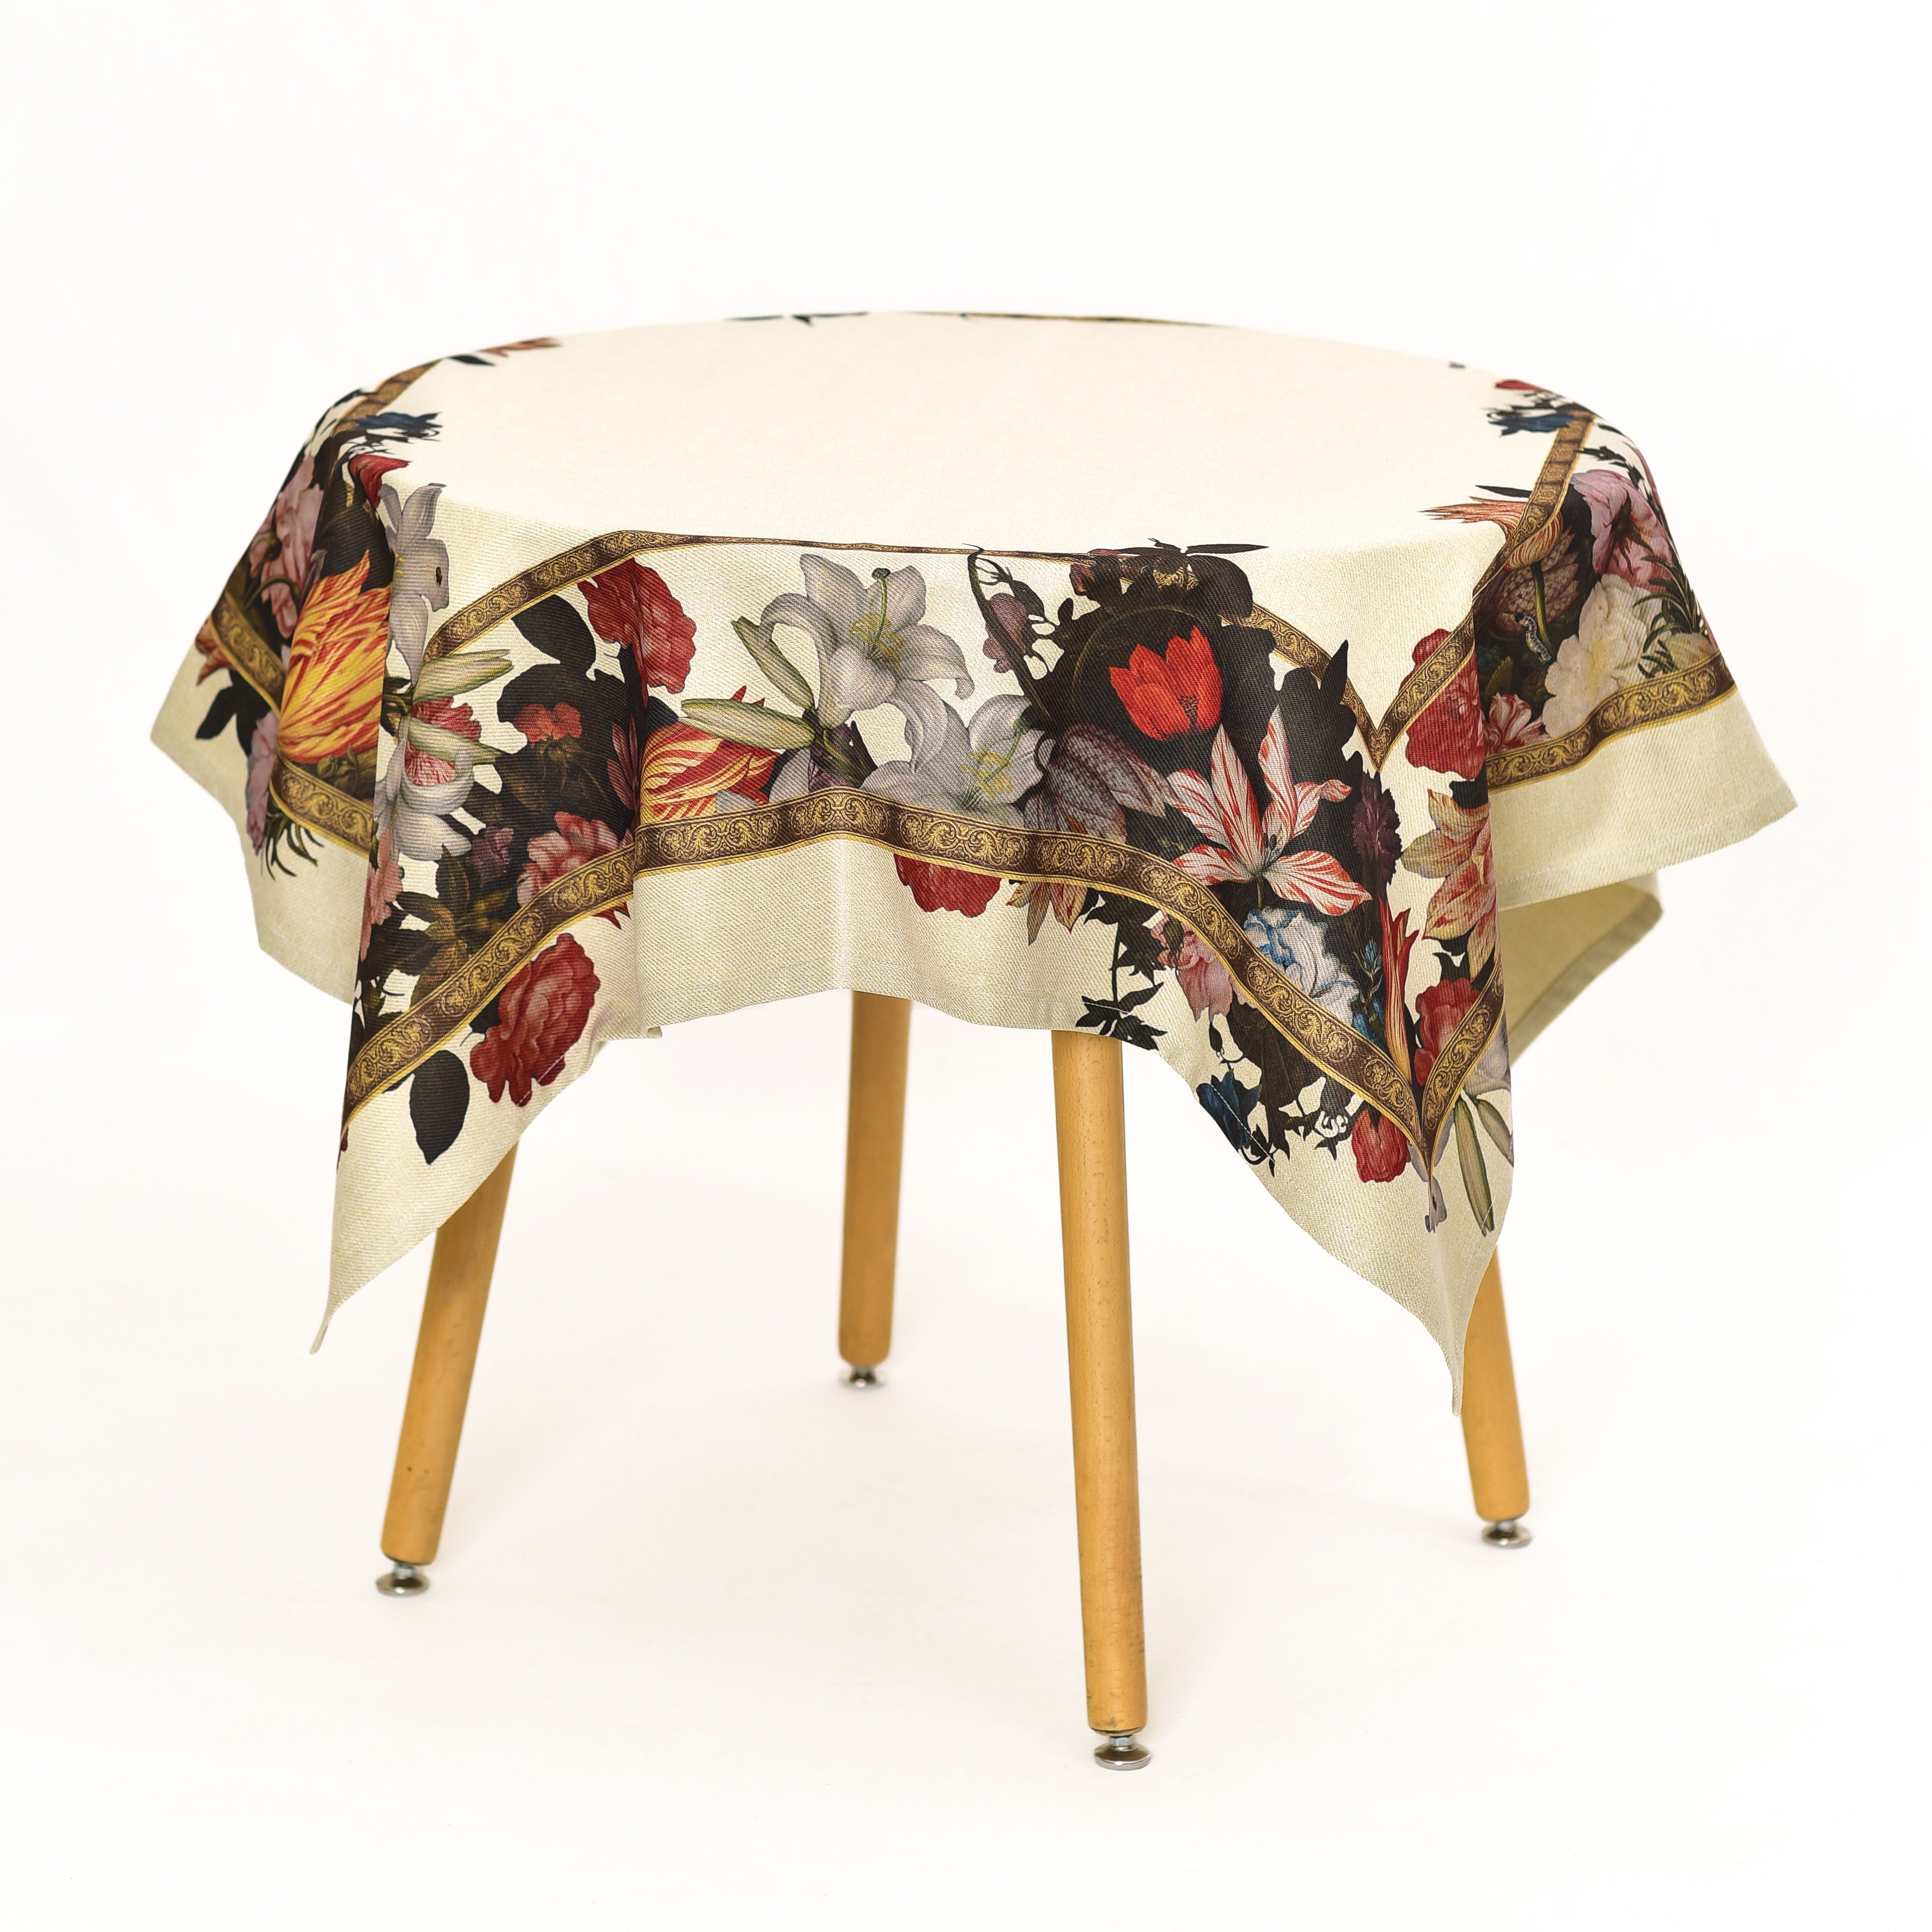 Recycled fabric tablecloth Ambrosius Bosschaert "Still-Life of Flowers"